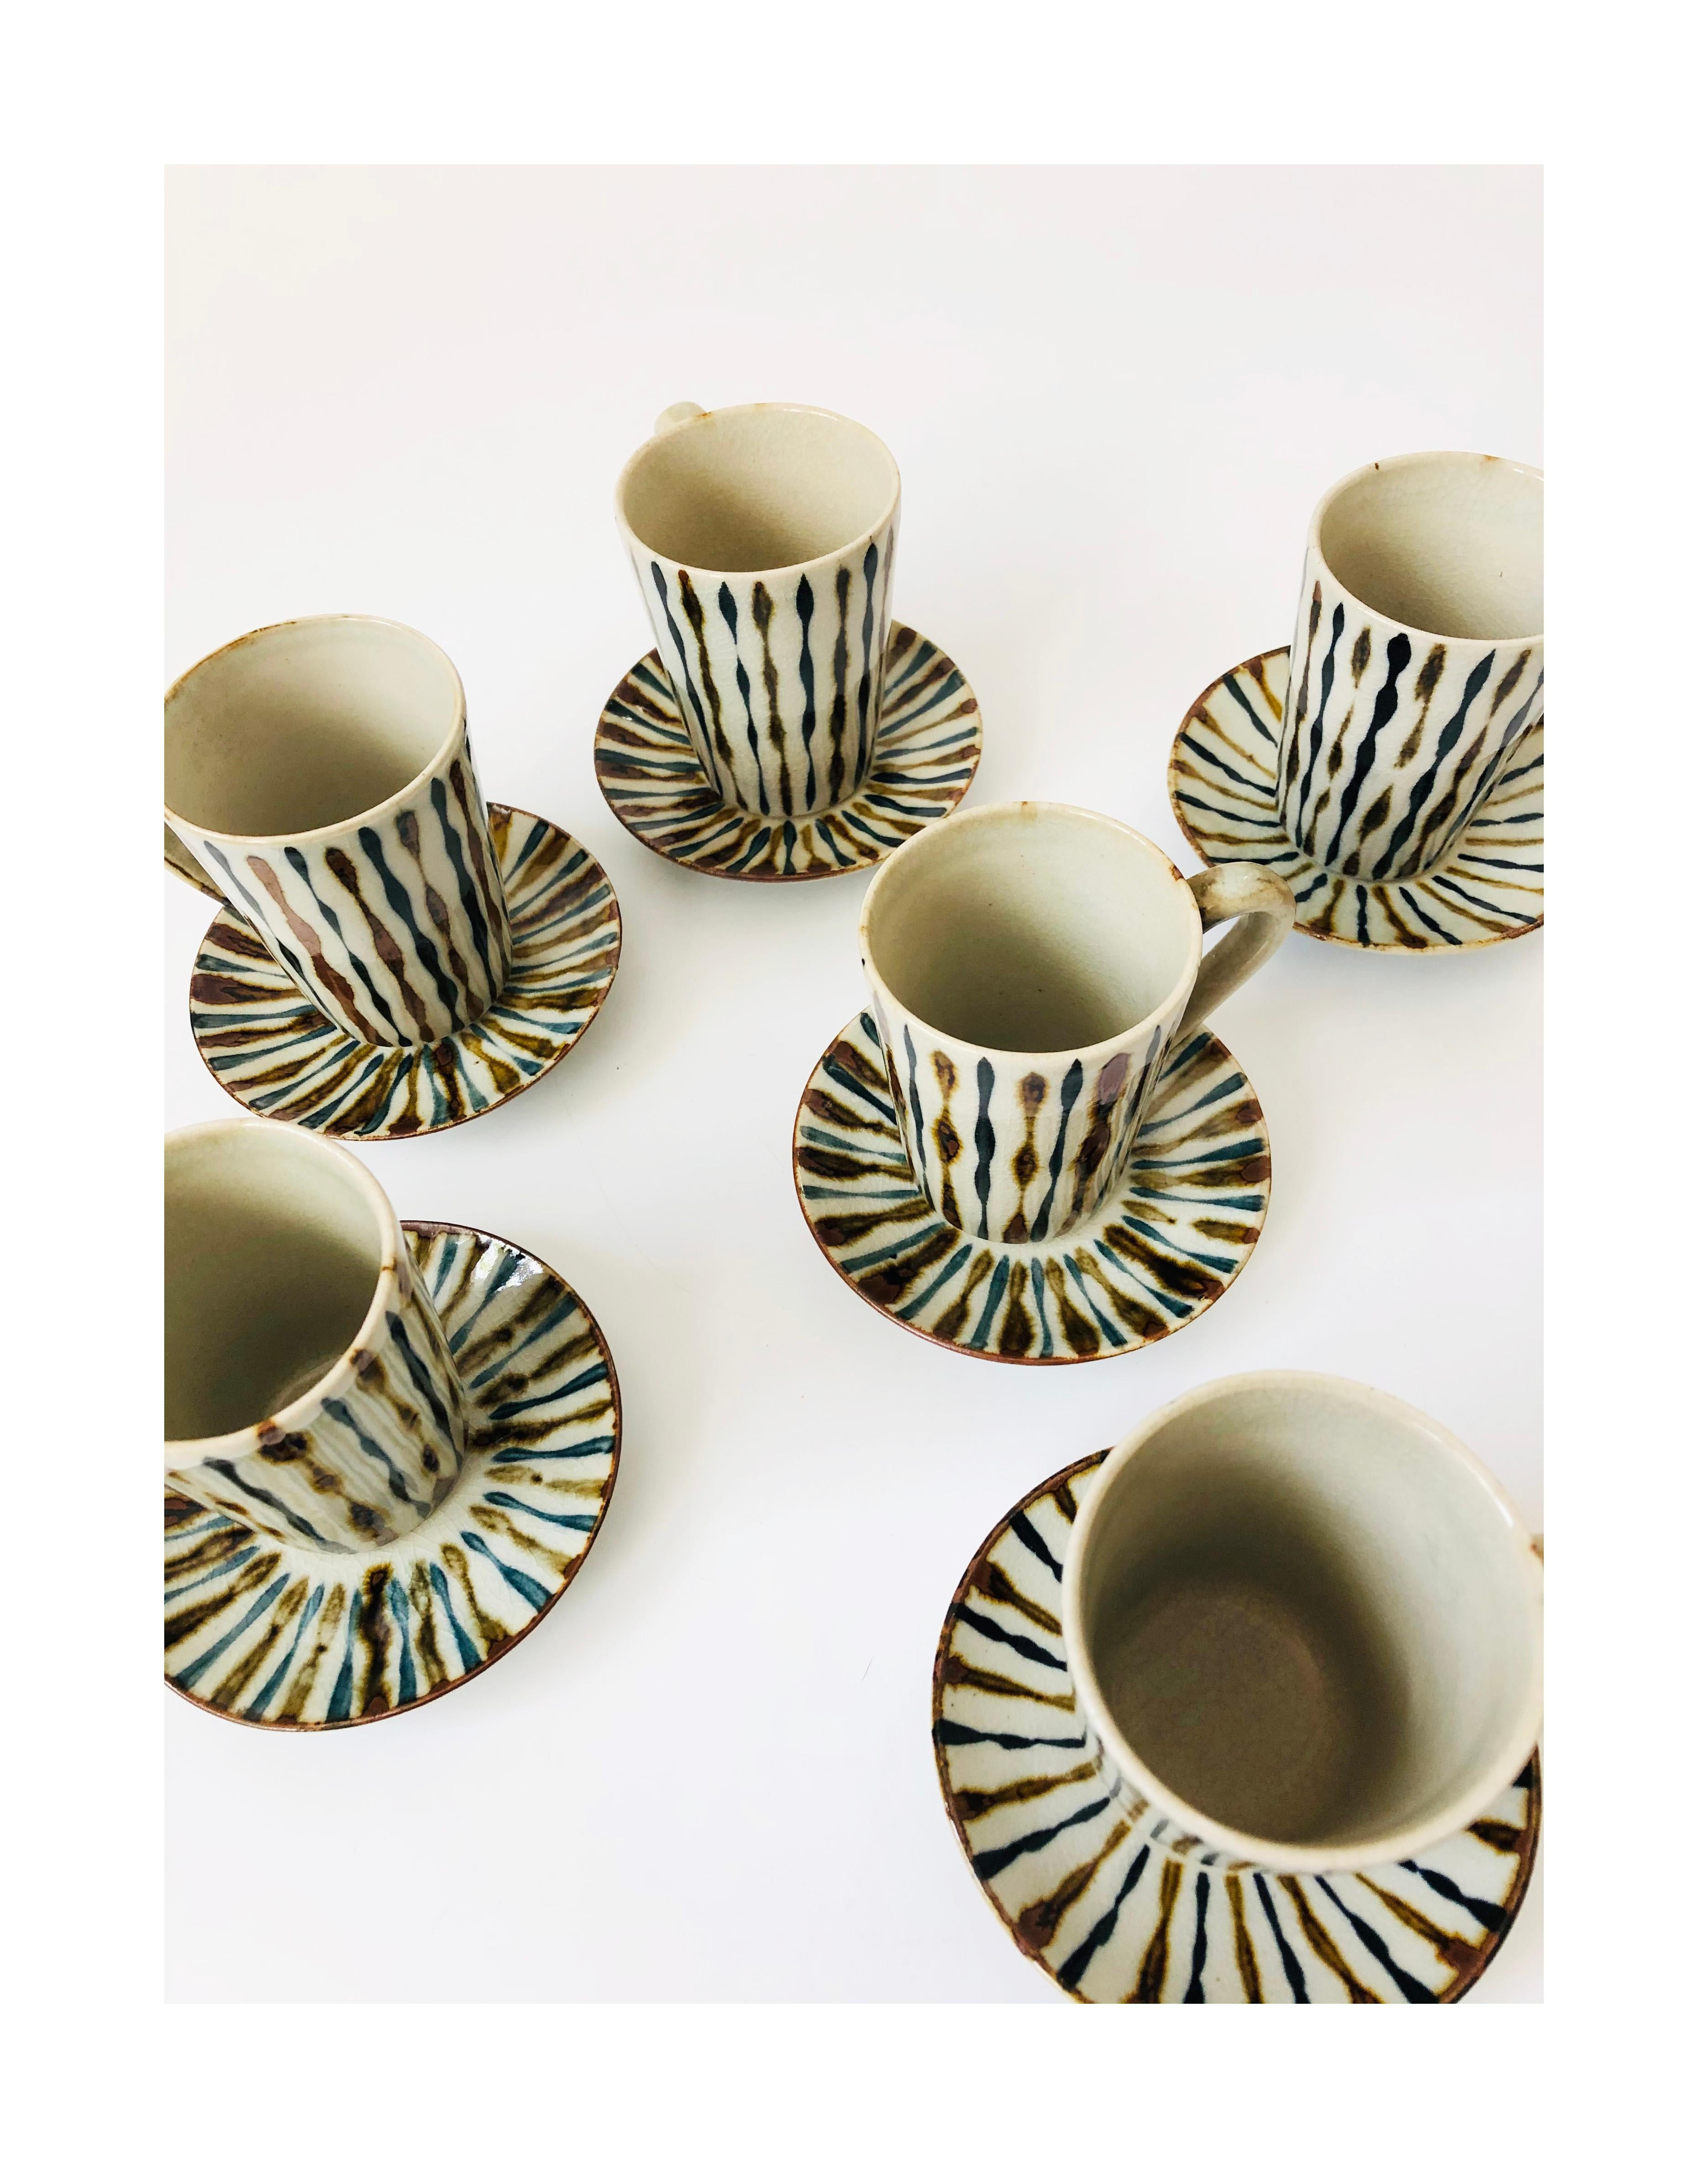 A set of 6 vintage handmade pottery demitasse mugs and saucers. Each piece is decorated with a painted dark blue and brown striped design over a gray base color.
Each mug measures 3.25